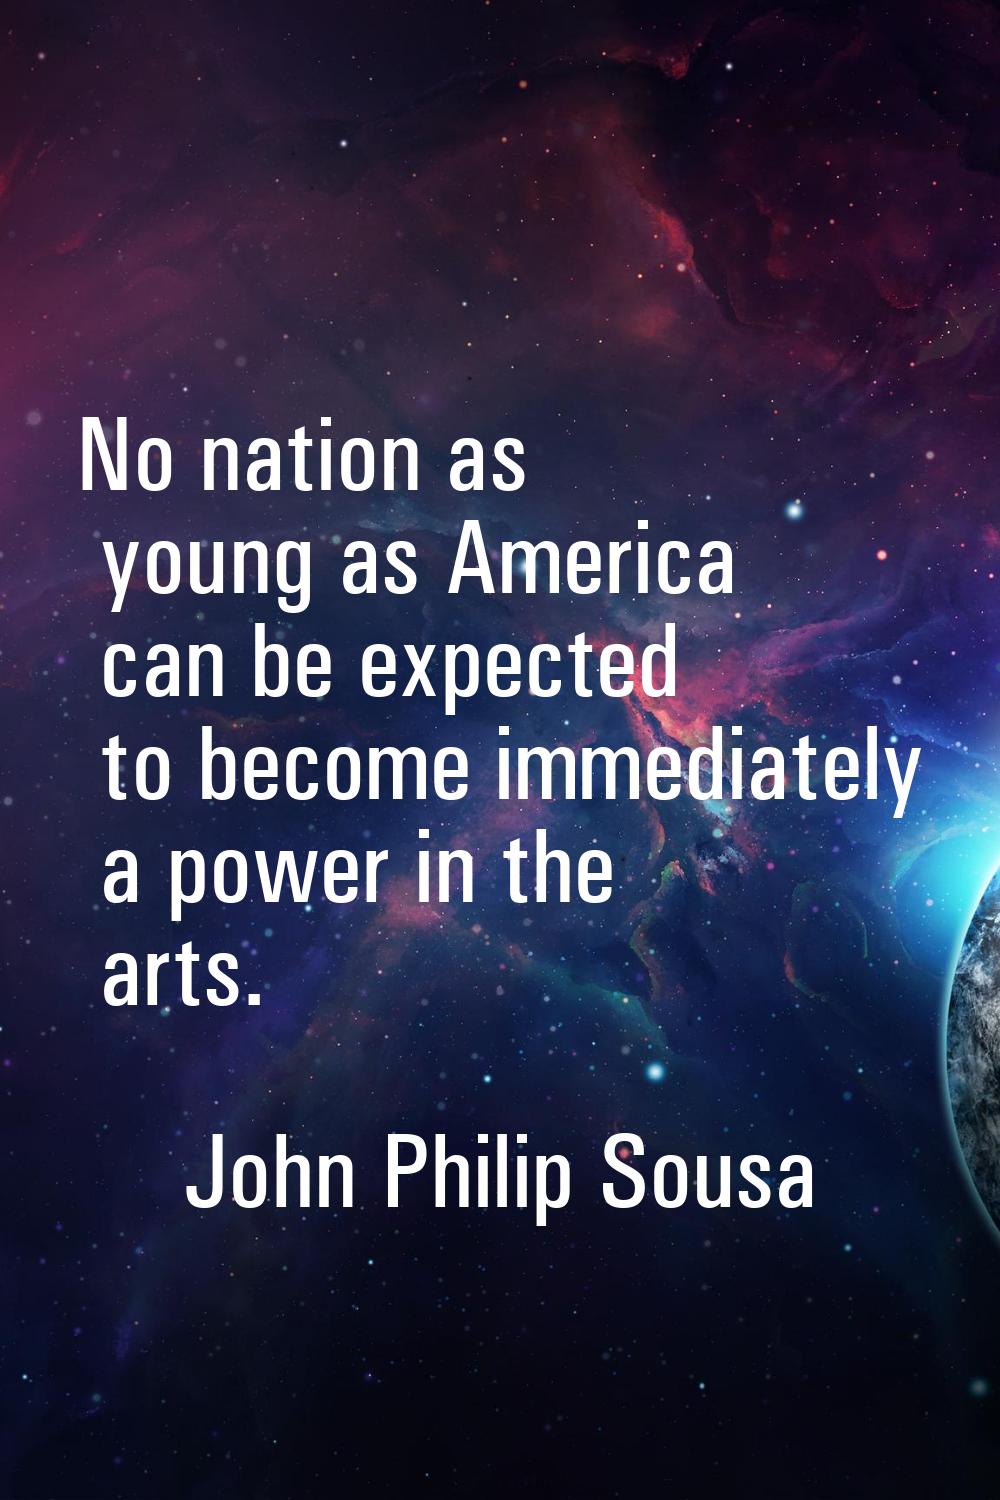 No nation as young as America can be expected to become immediately a power in the arts.